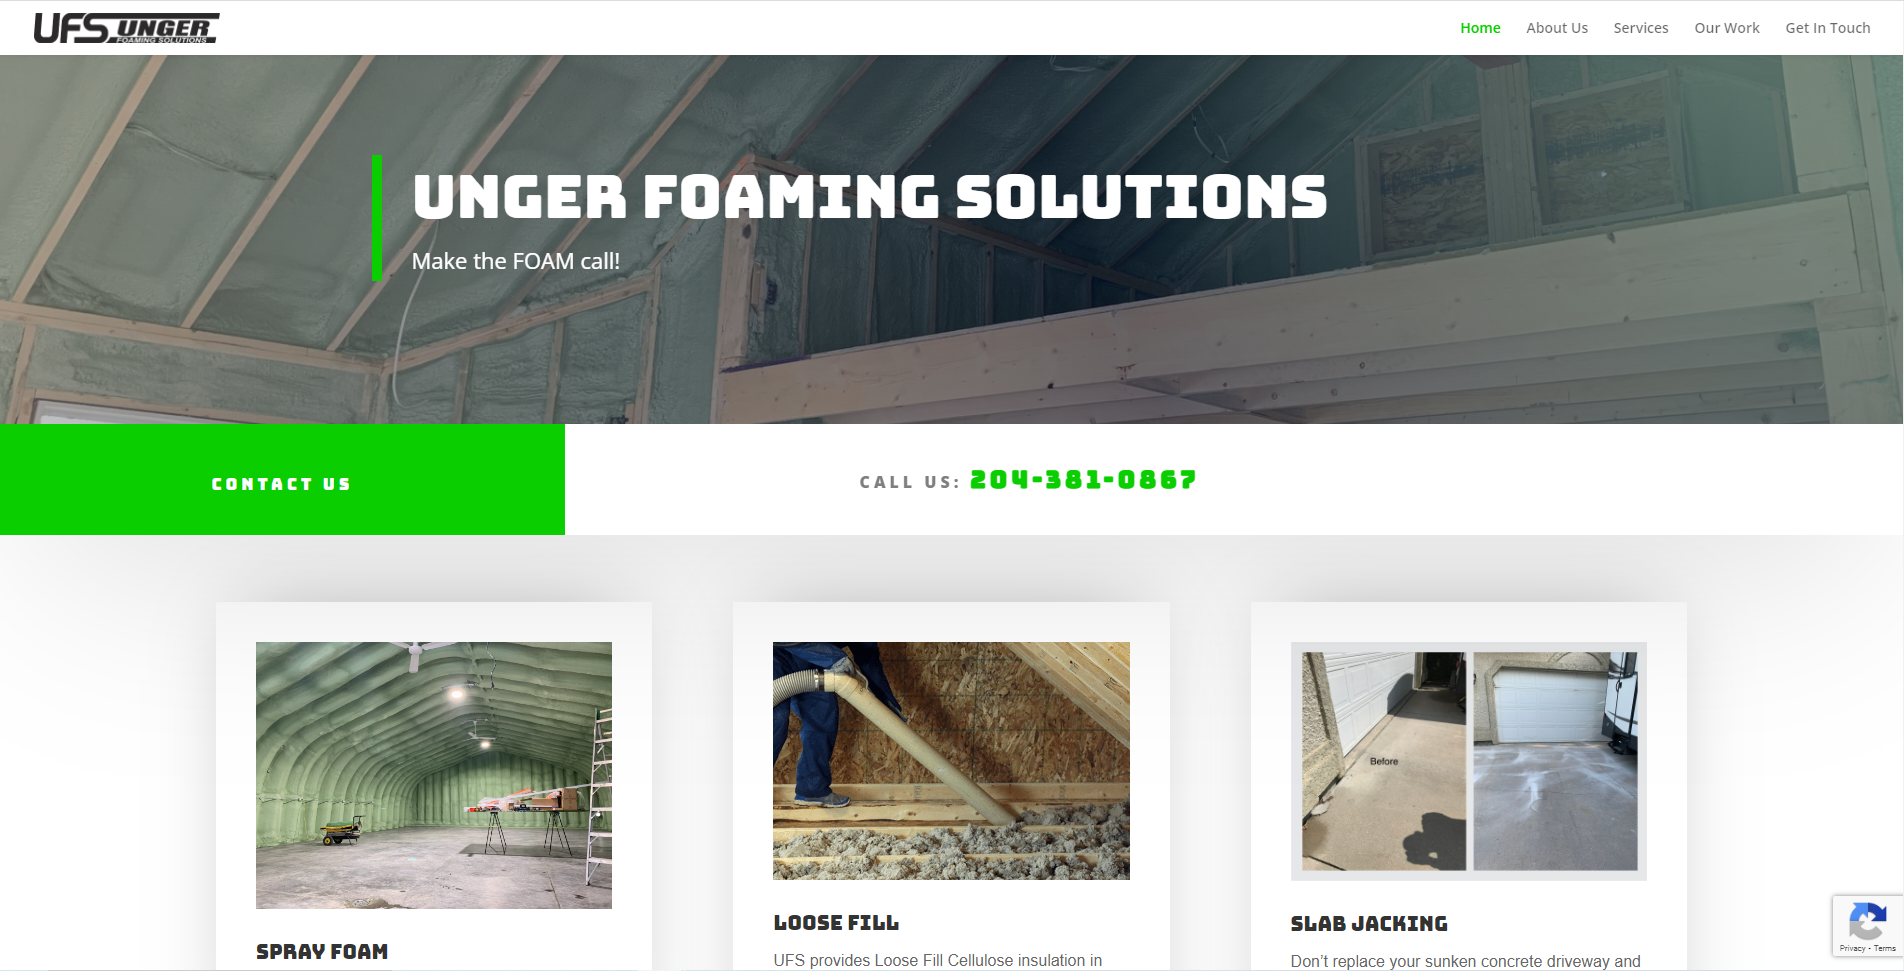 Website Design for Unger Foaming Solutions. A website build with strong design and services focus.